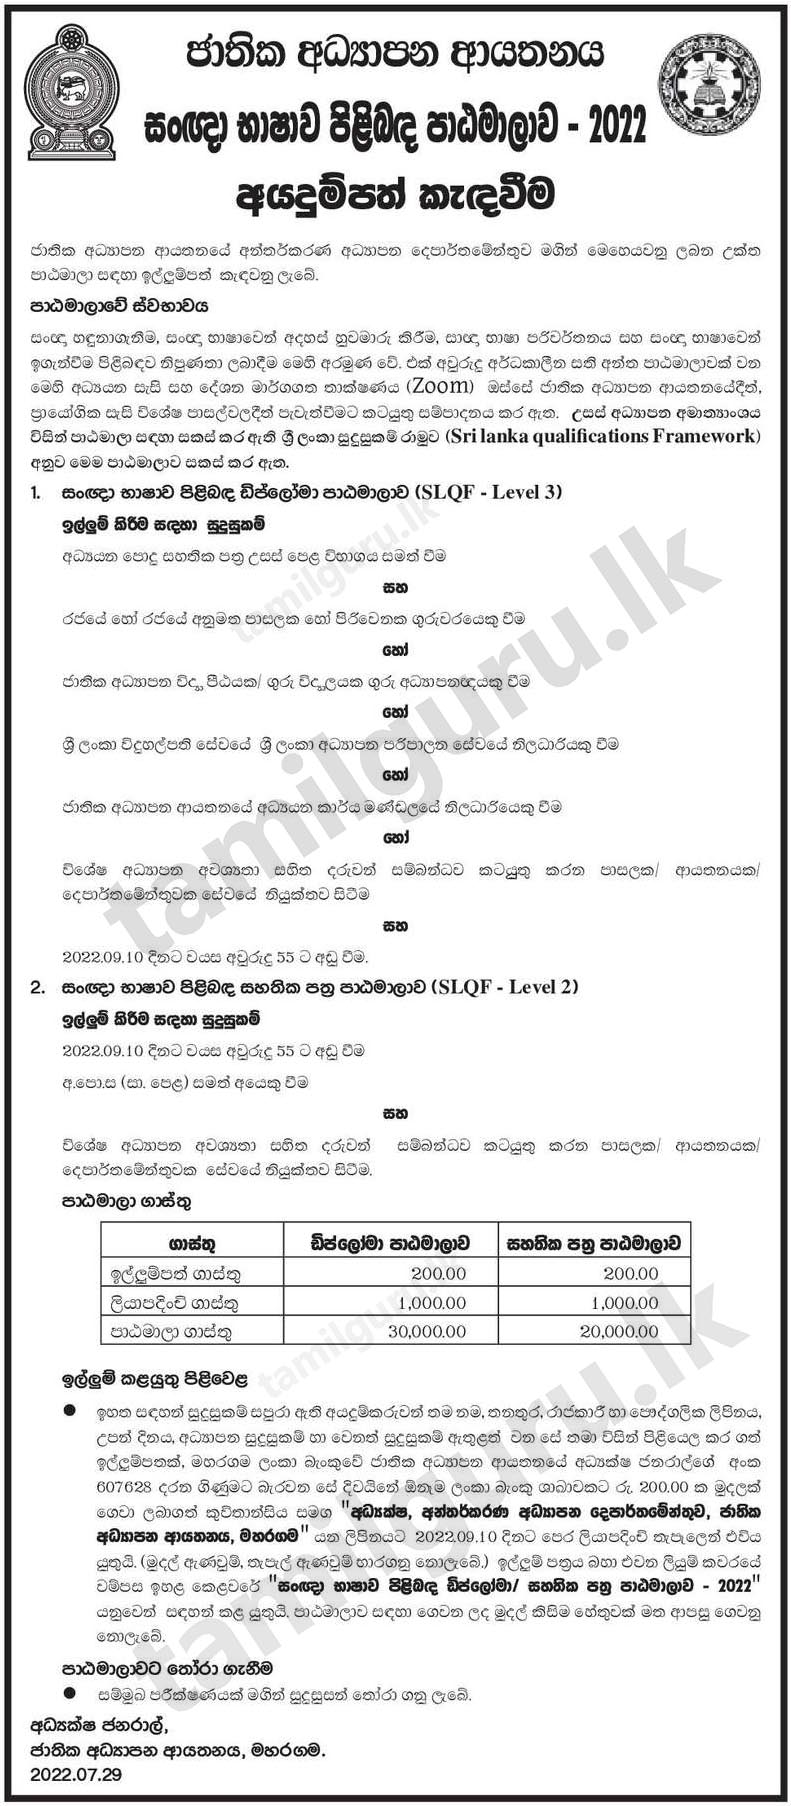 Calling Applications for Sign Language Courses (Diploma & Certificate) (2022) - National Institute of Education (NIE) / සංඥා භාෂාව පිළිබඳ පාඨමාලා - ජාතික අධ්‍යාපන ආයතනය